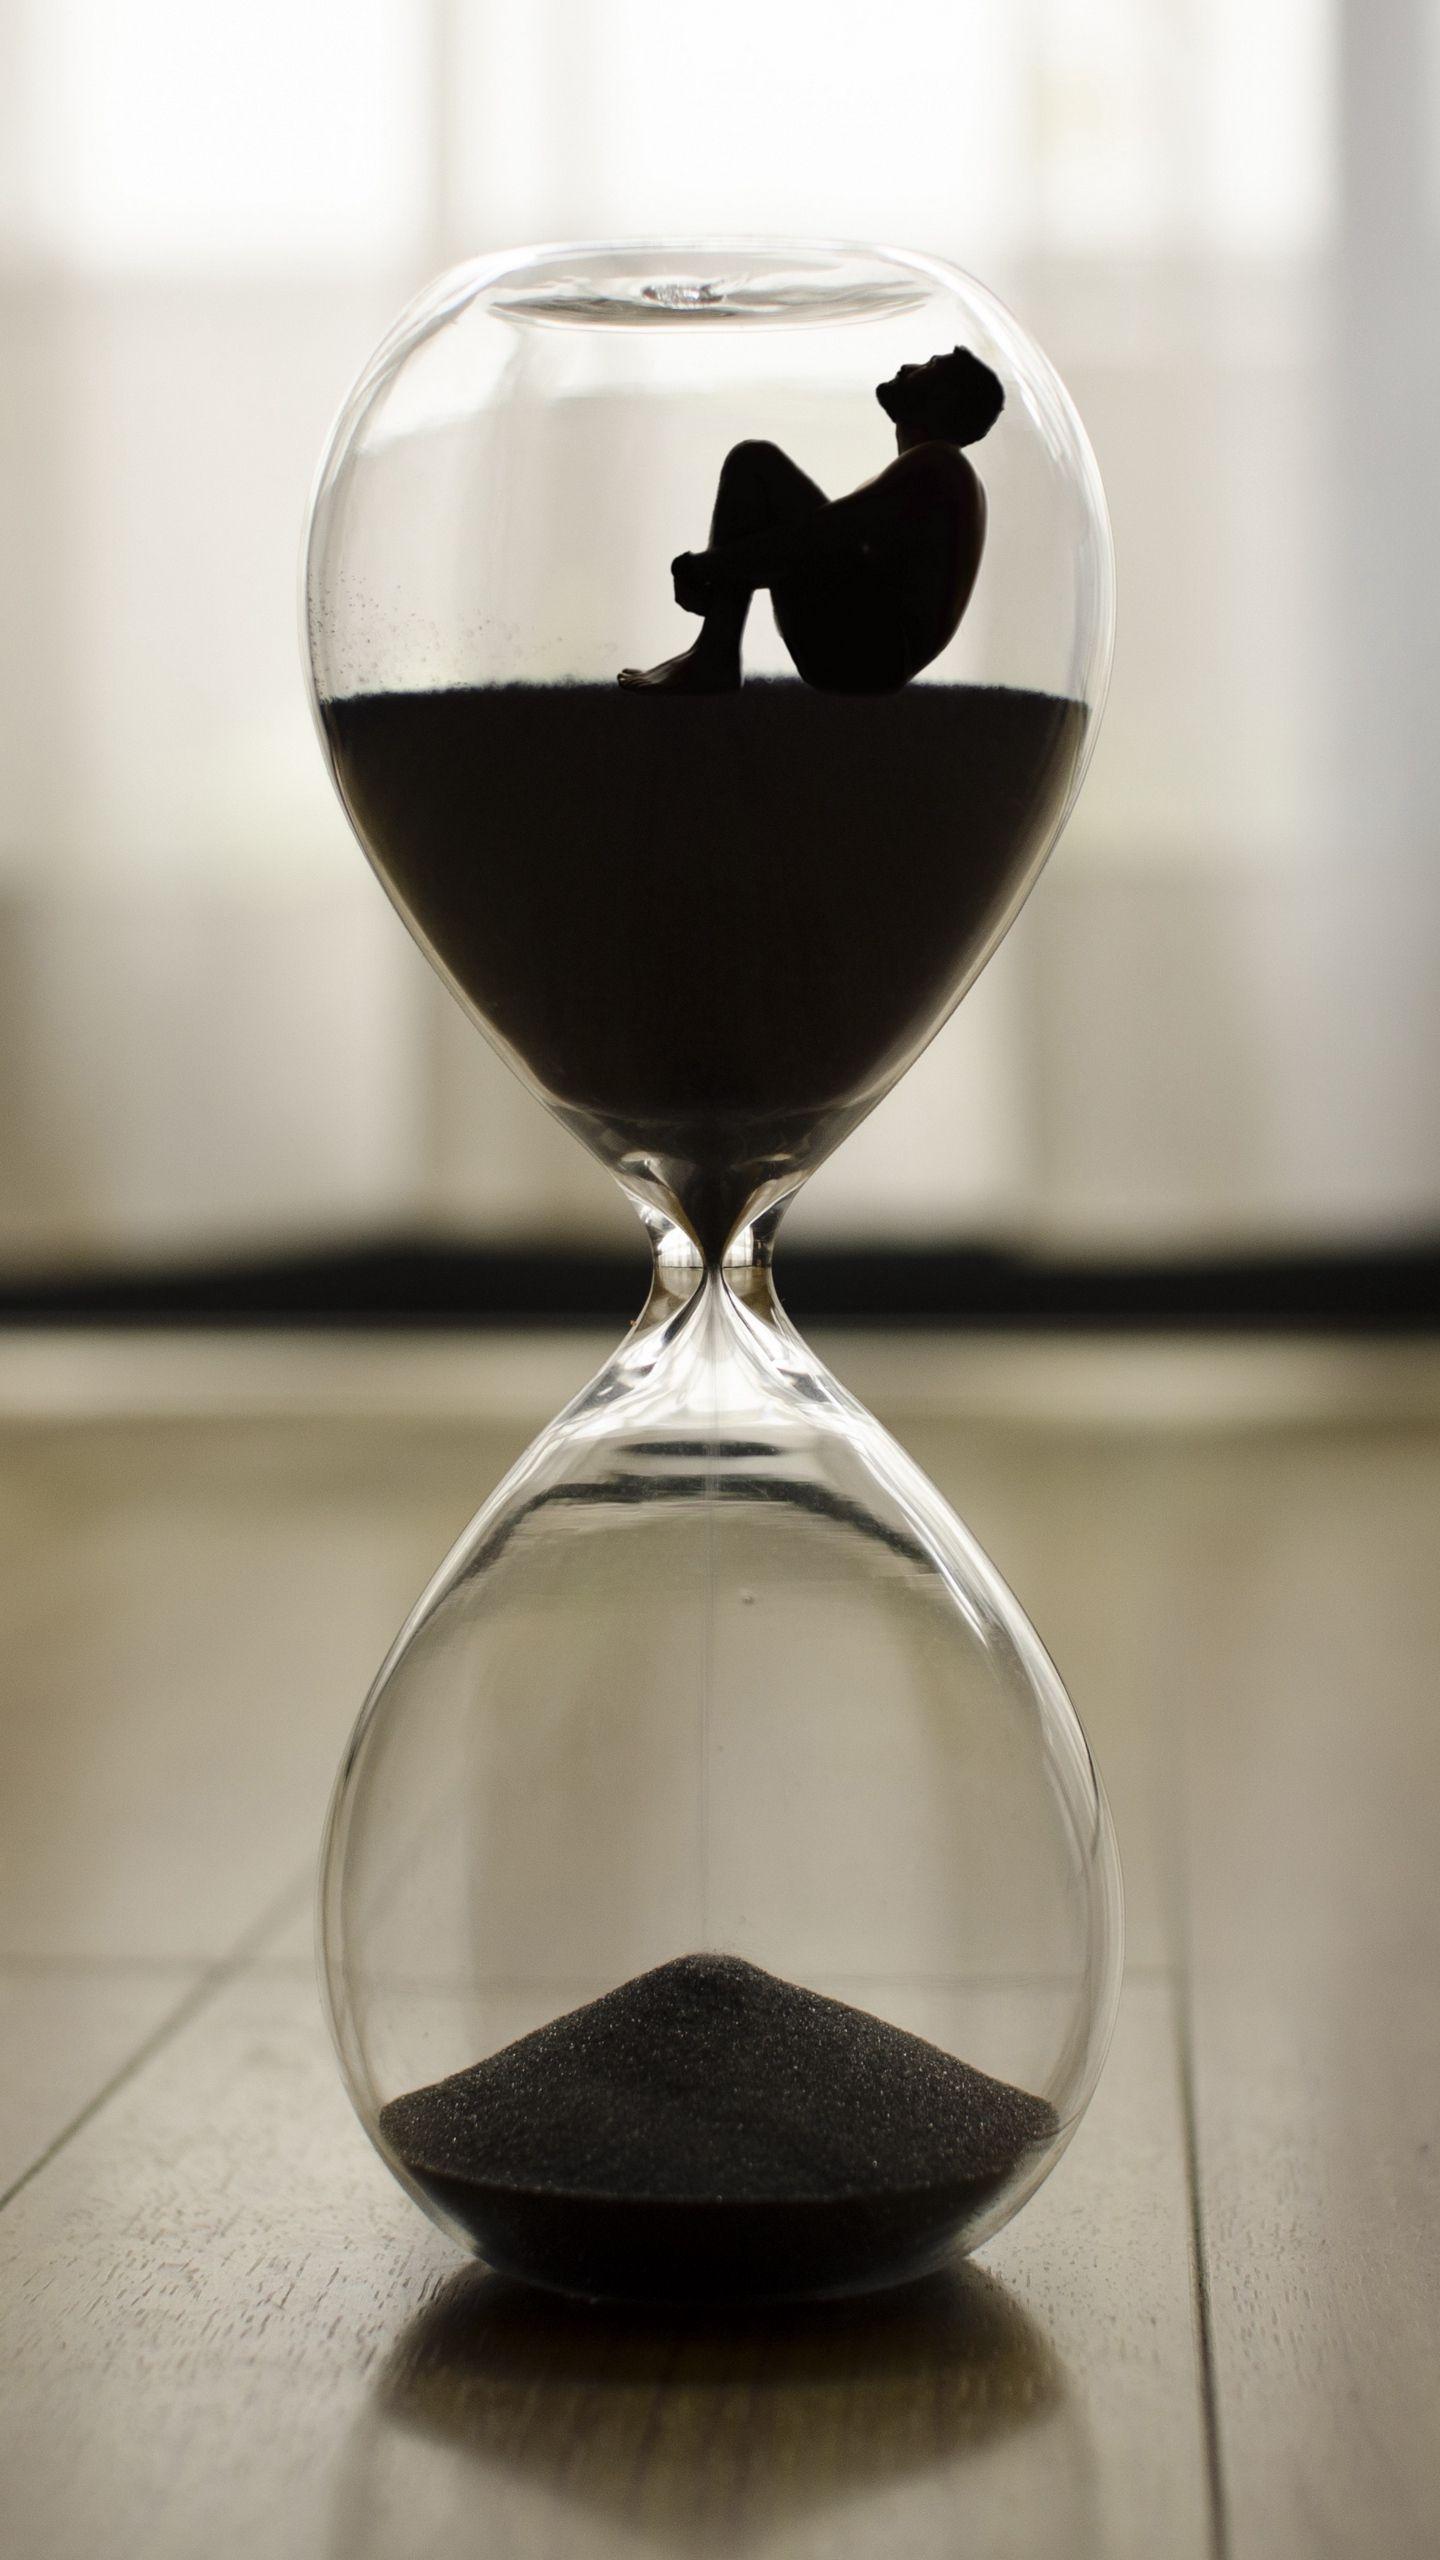 Download wallpaper 1440x2560 hourglass, man, time, loneliness qhd